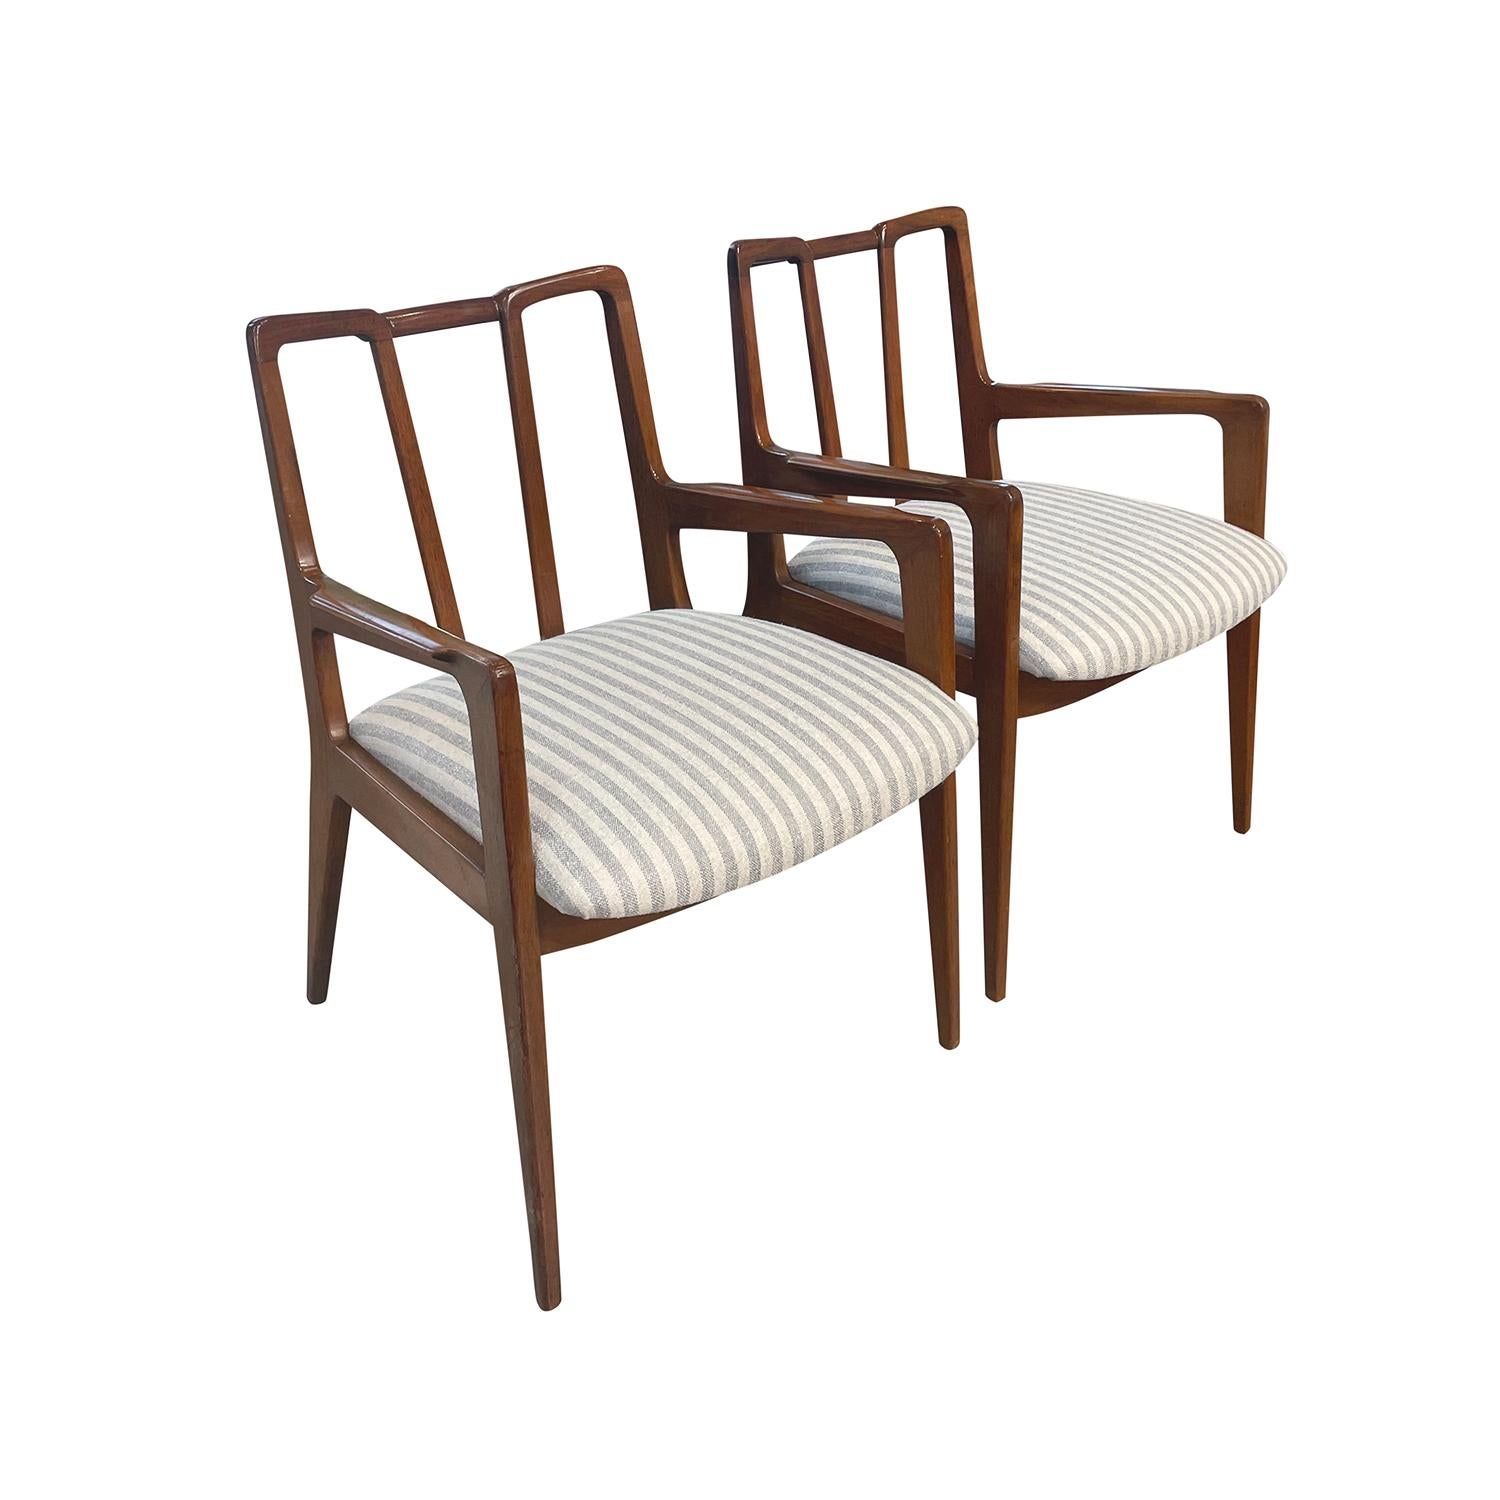 20th Century American Pair of Walnut Armchairs - Dining Chairs by John Stuart In Good Condition For Sale In West Palm Beach, FL